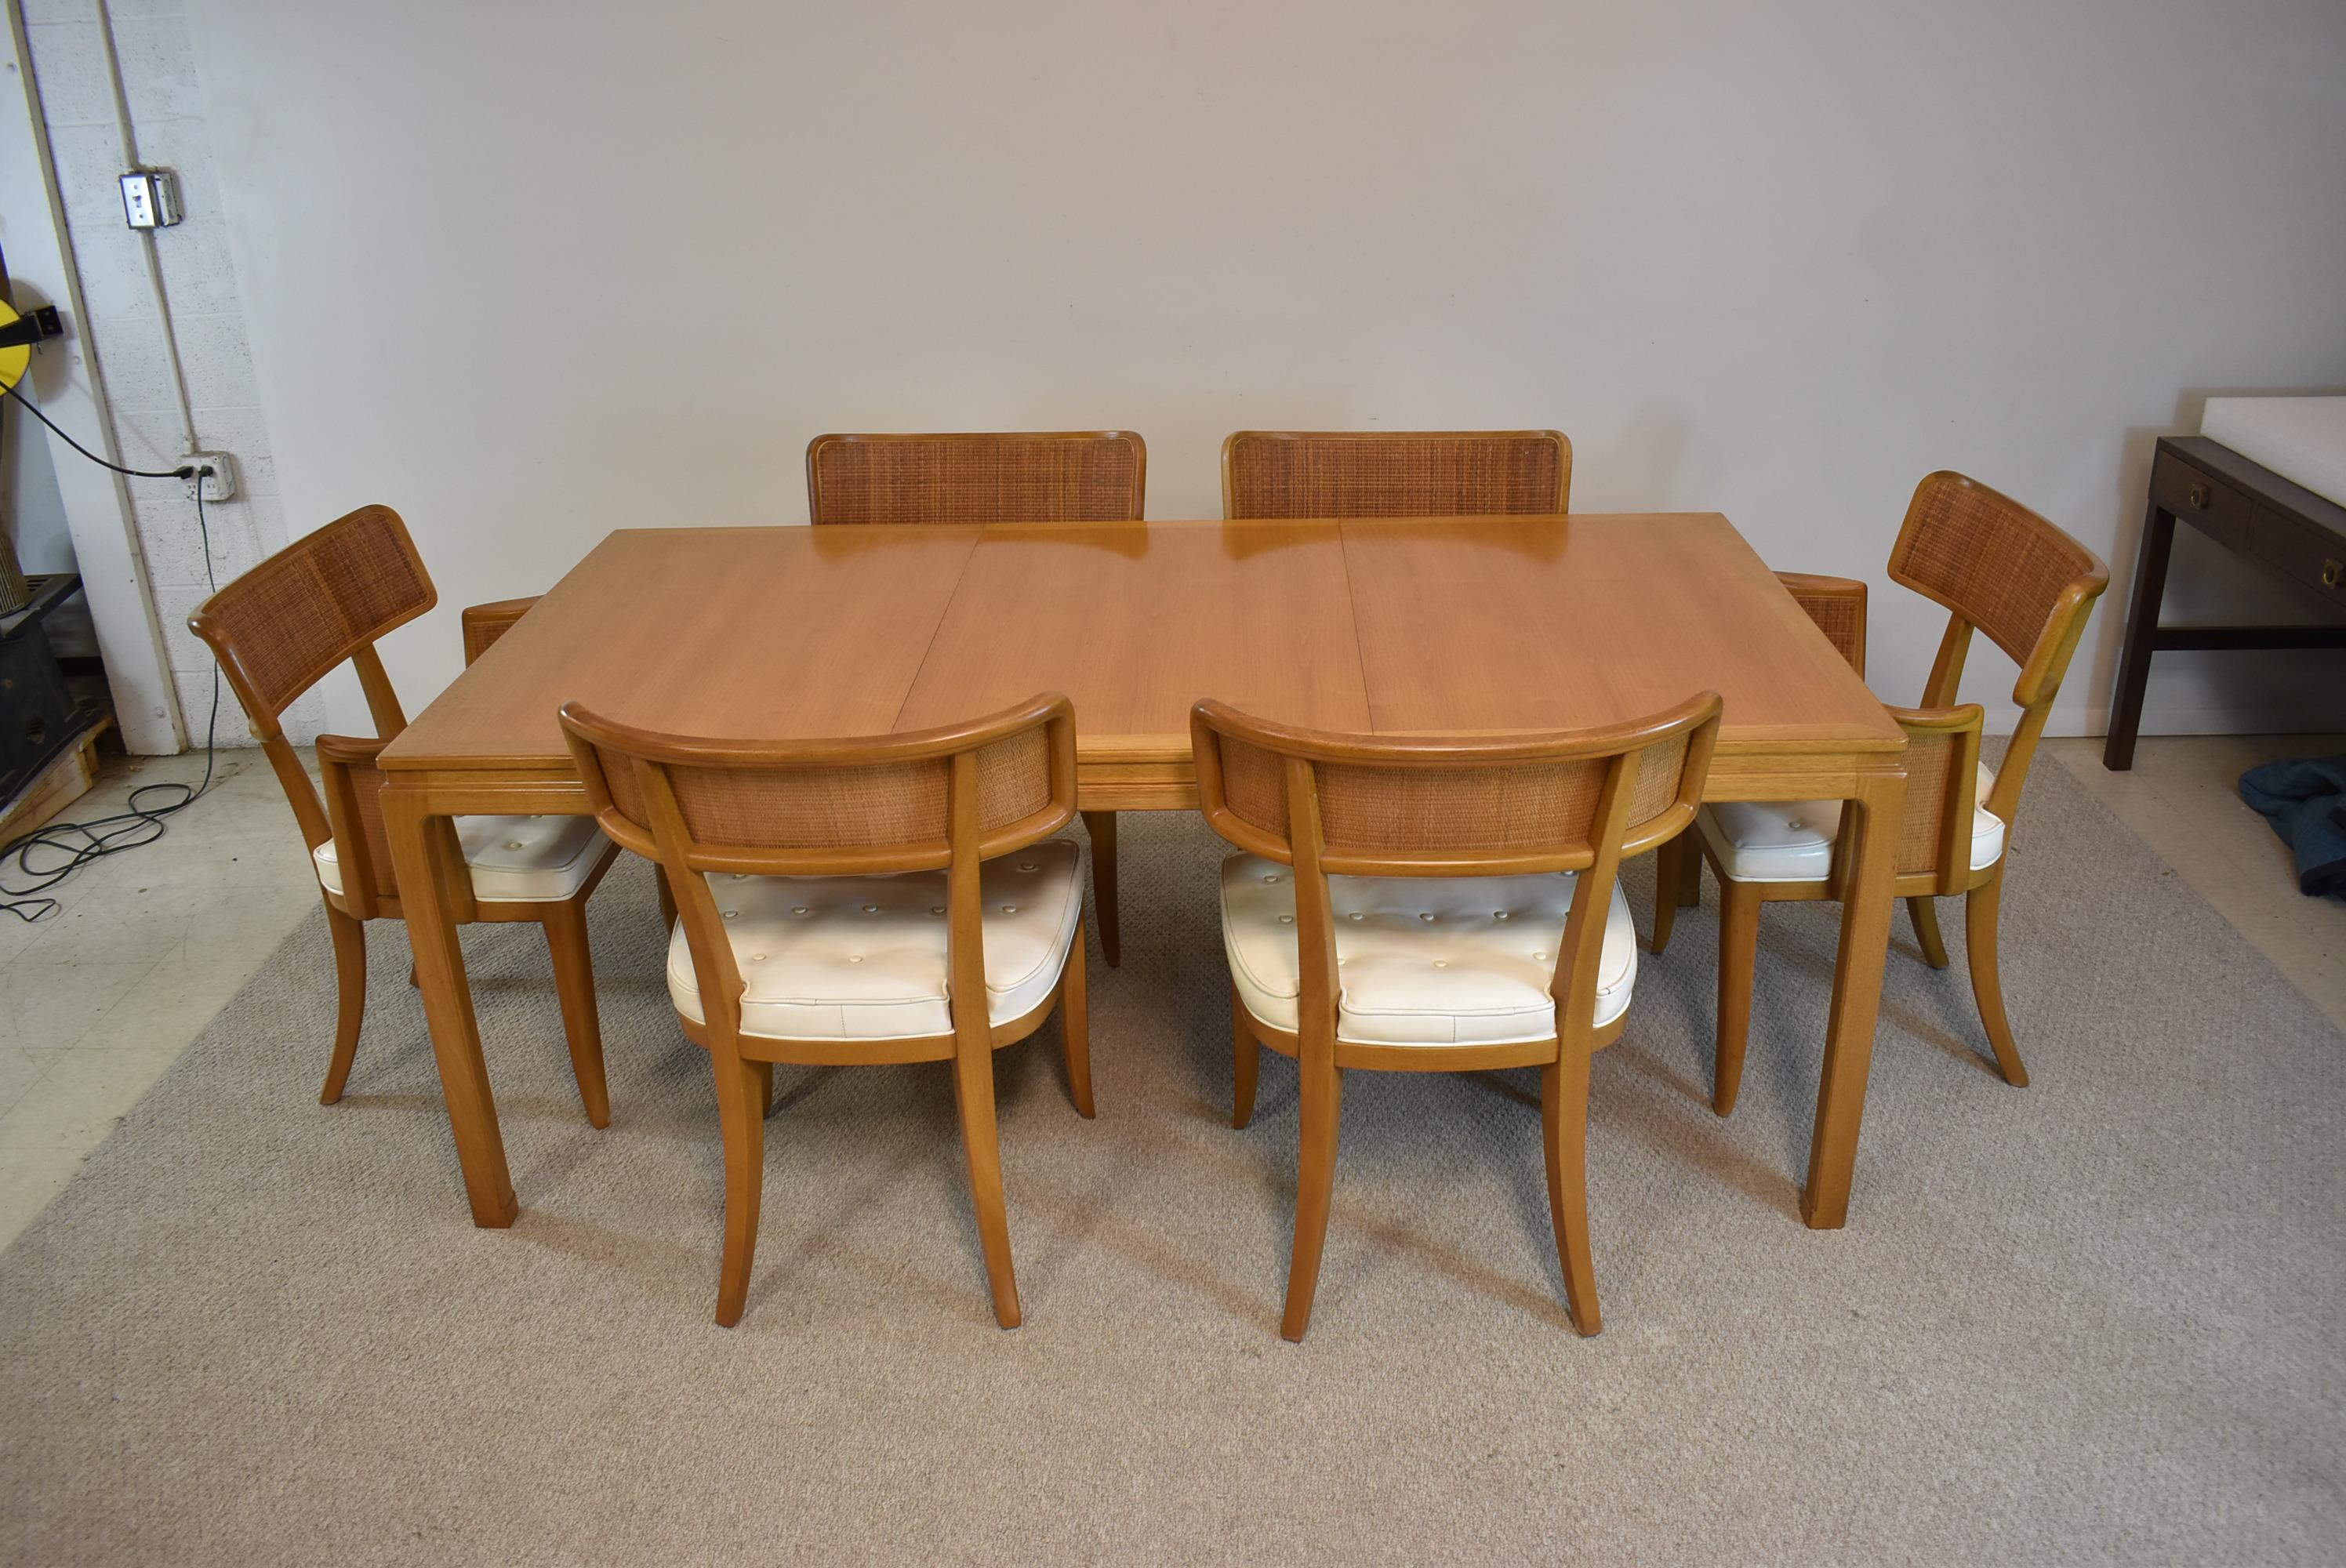 Six Vintage Dunbar Dining Chairs Cane Back Edward Wormley Design, circa 1950's For Sale 6